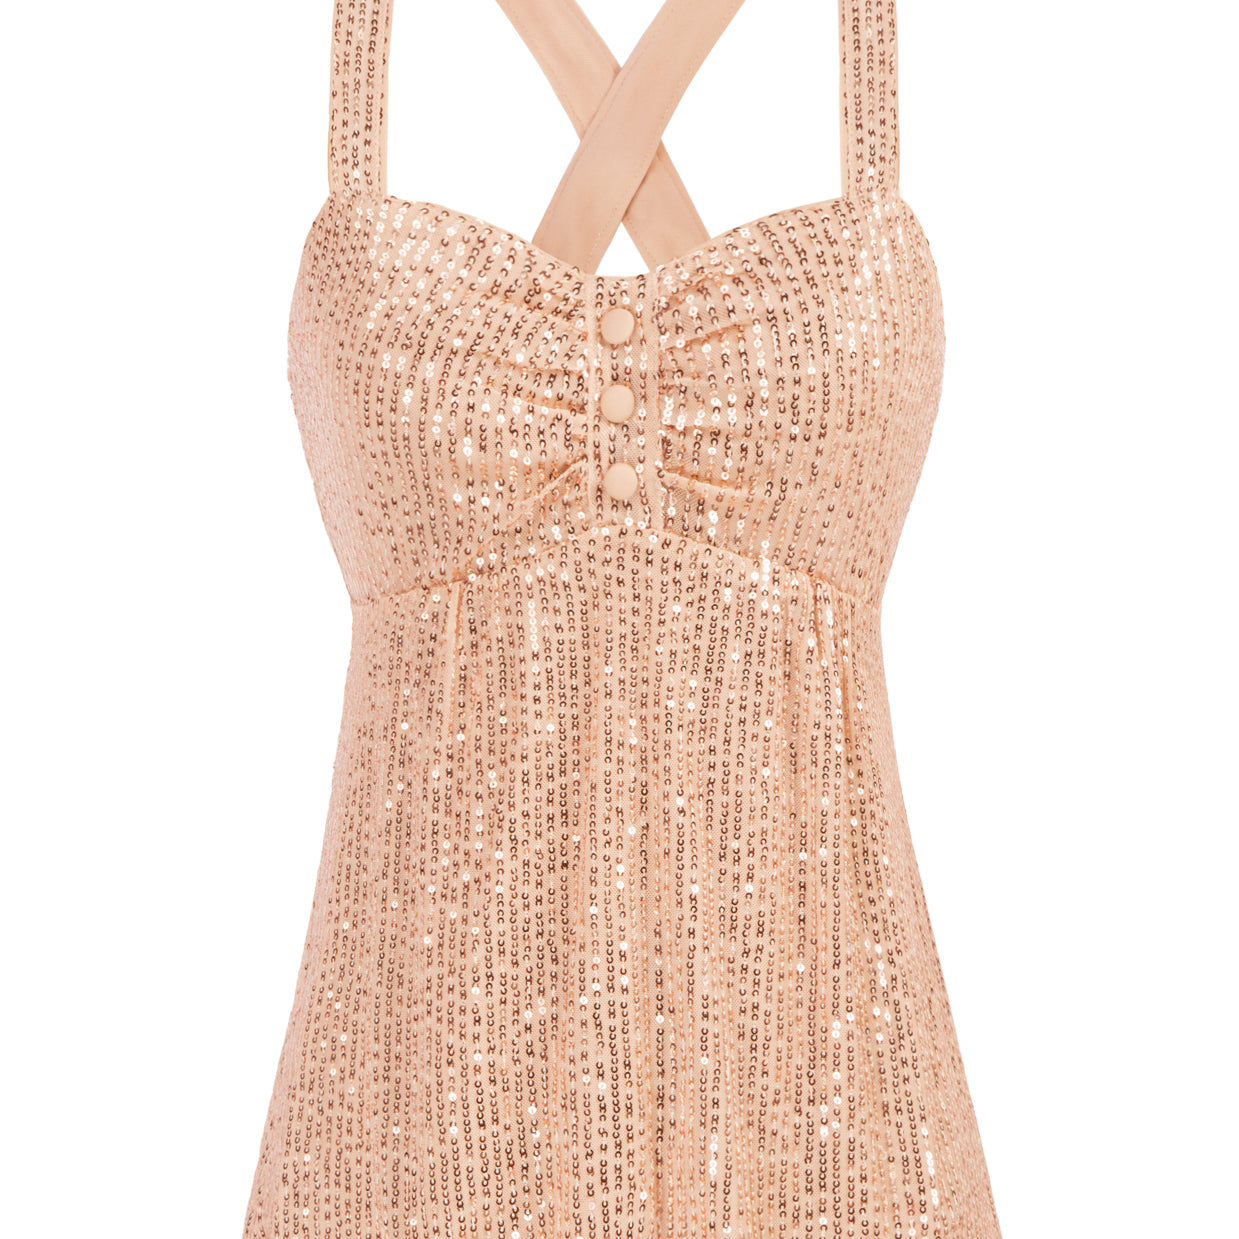 Sparkle Sequin Cami Tank Top Sleeveless Halter Flowy Party Top⏰Flash Sale